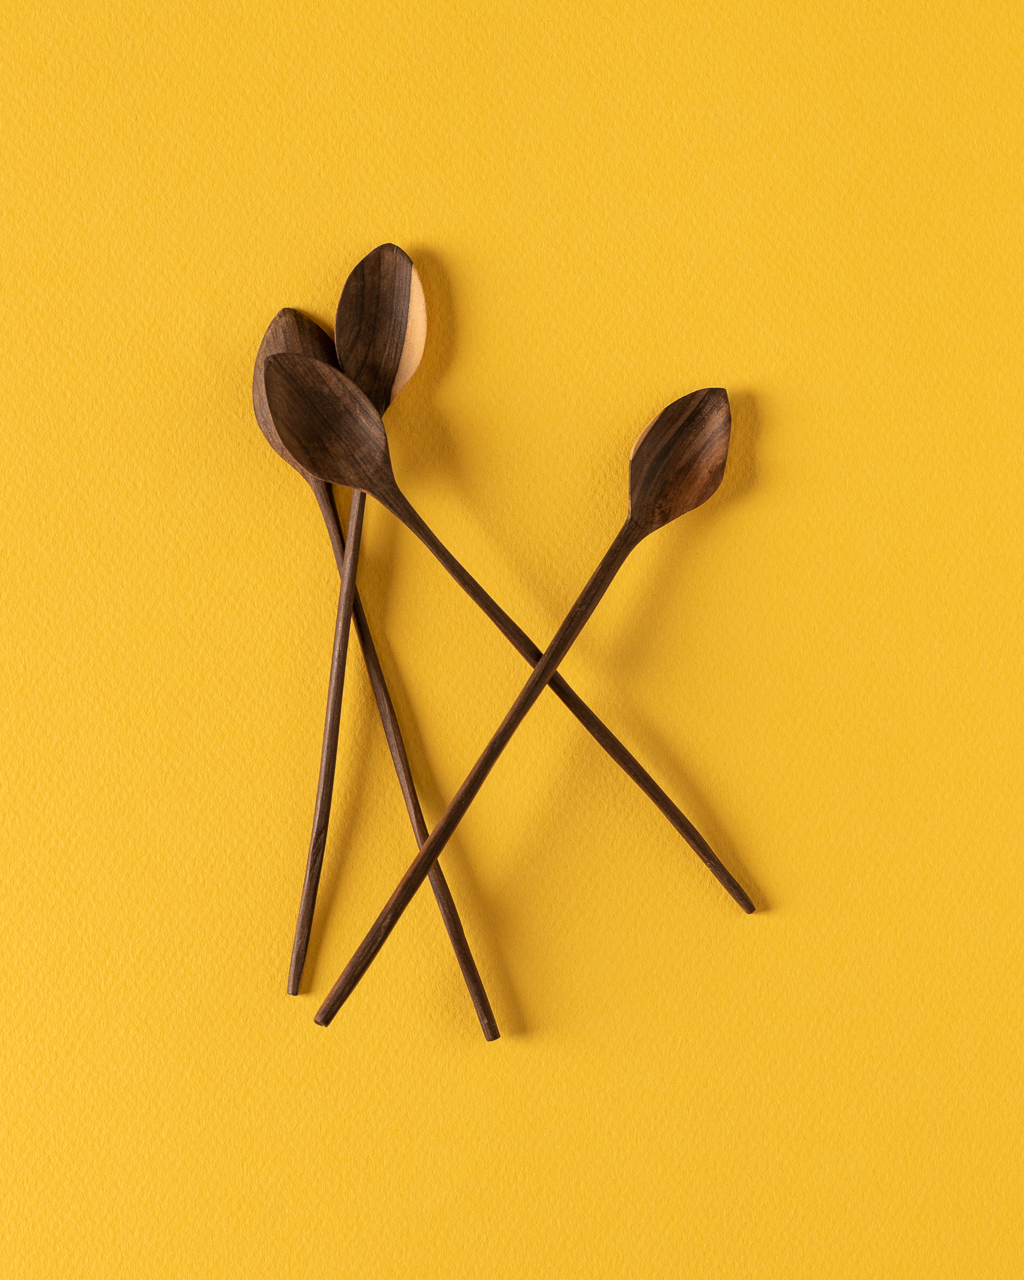 Tossed wooden spoons on yellow by Jose Barrios